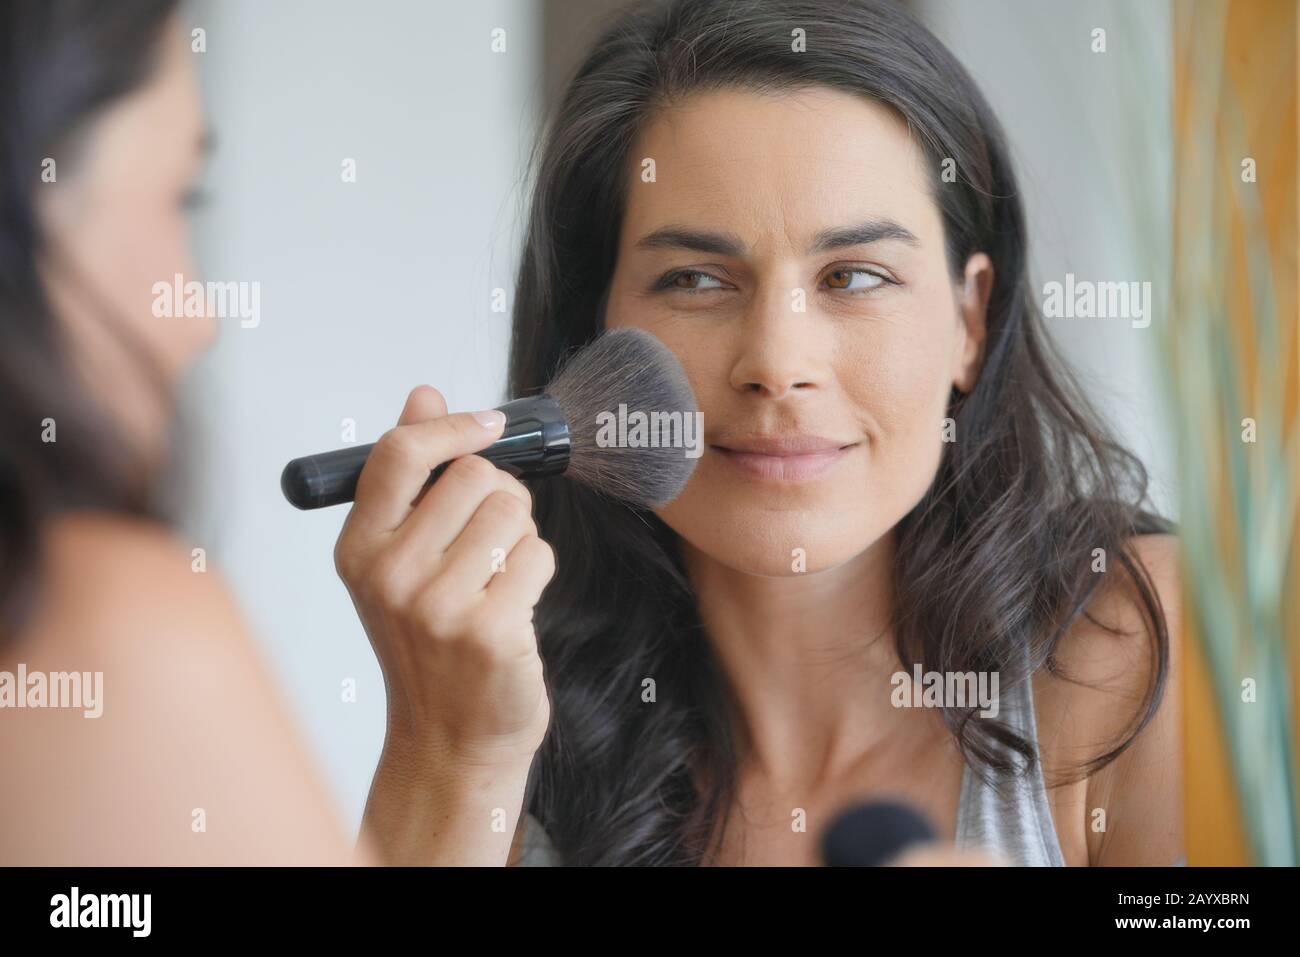 Portrait of brunette woman putting makeup on Stock Photo